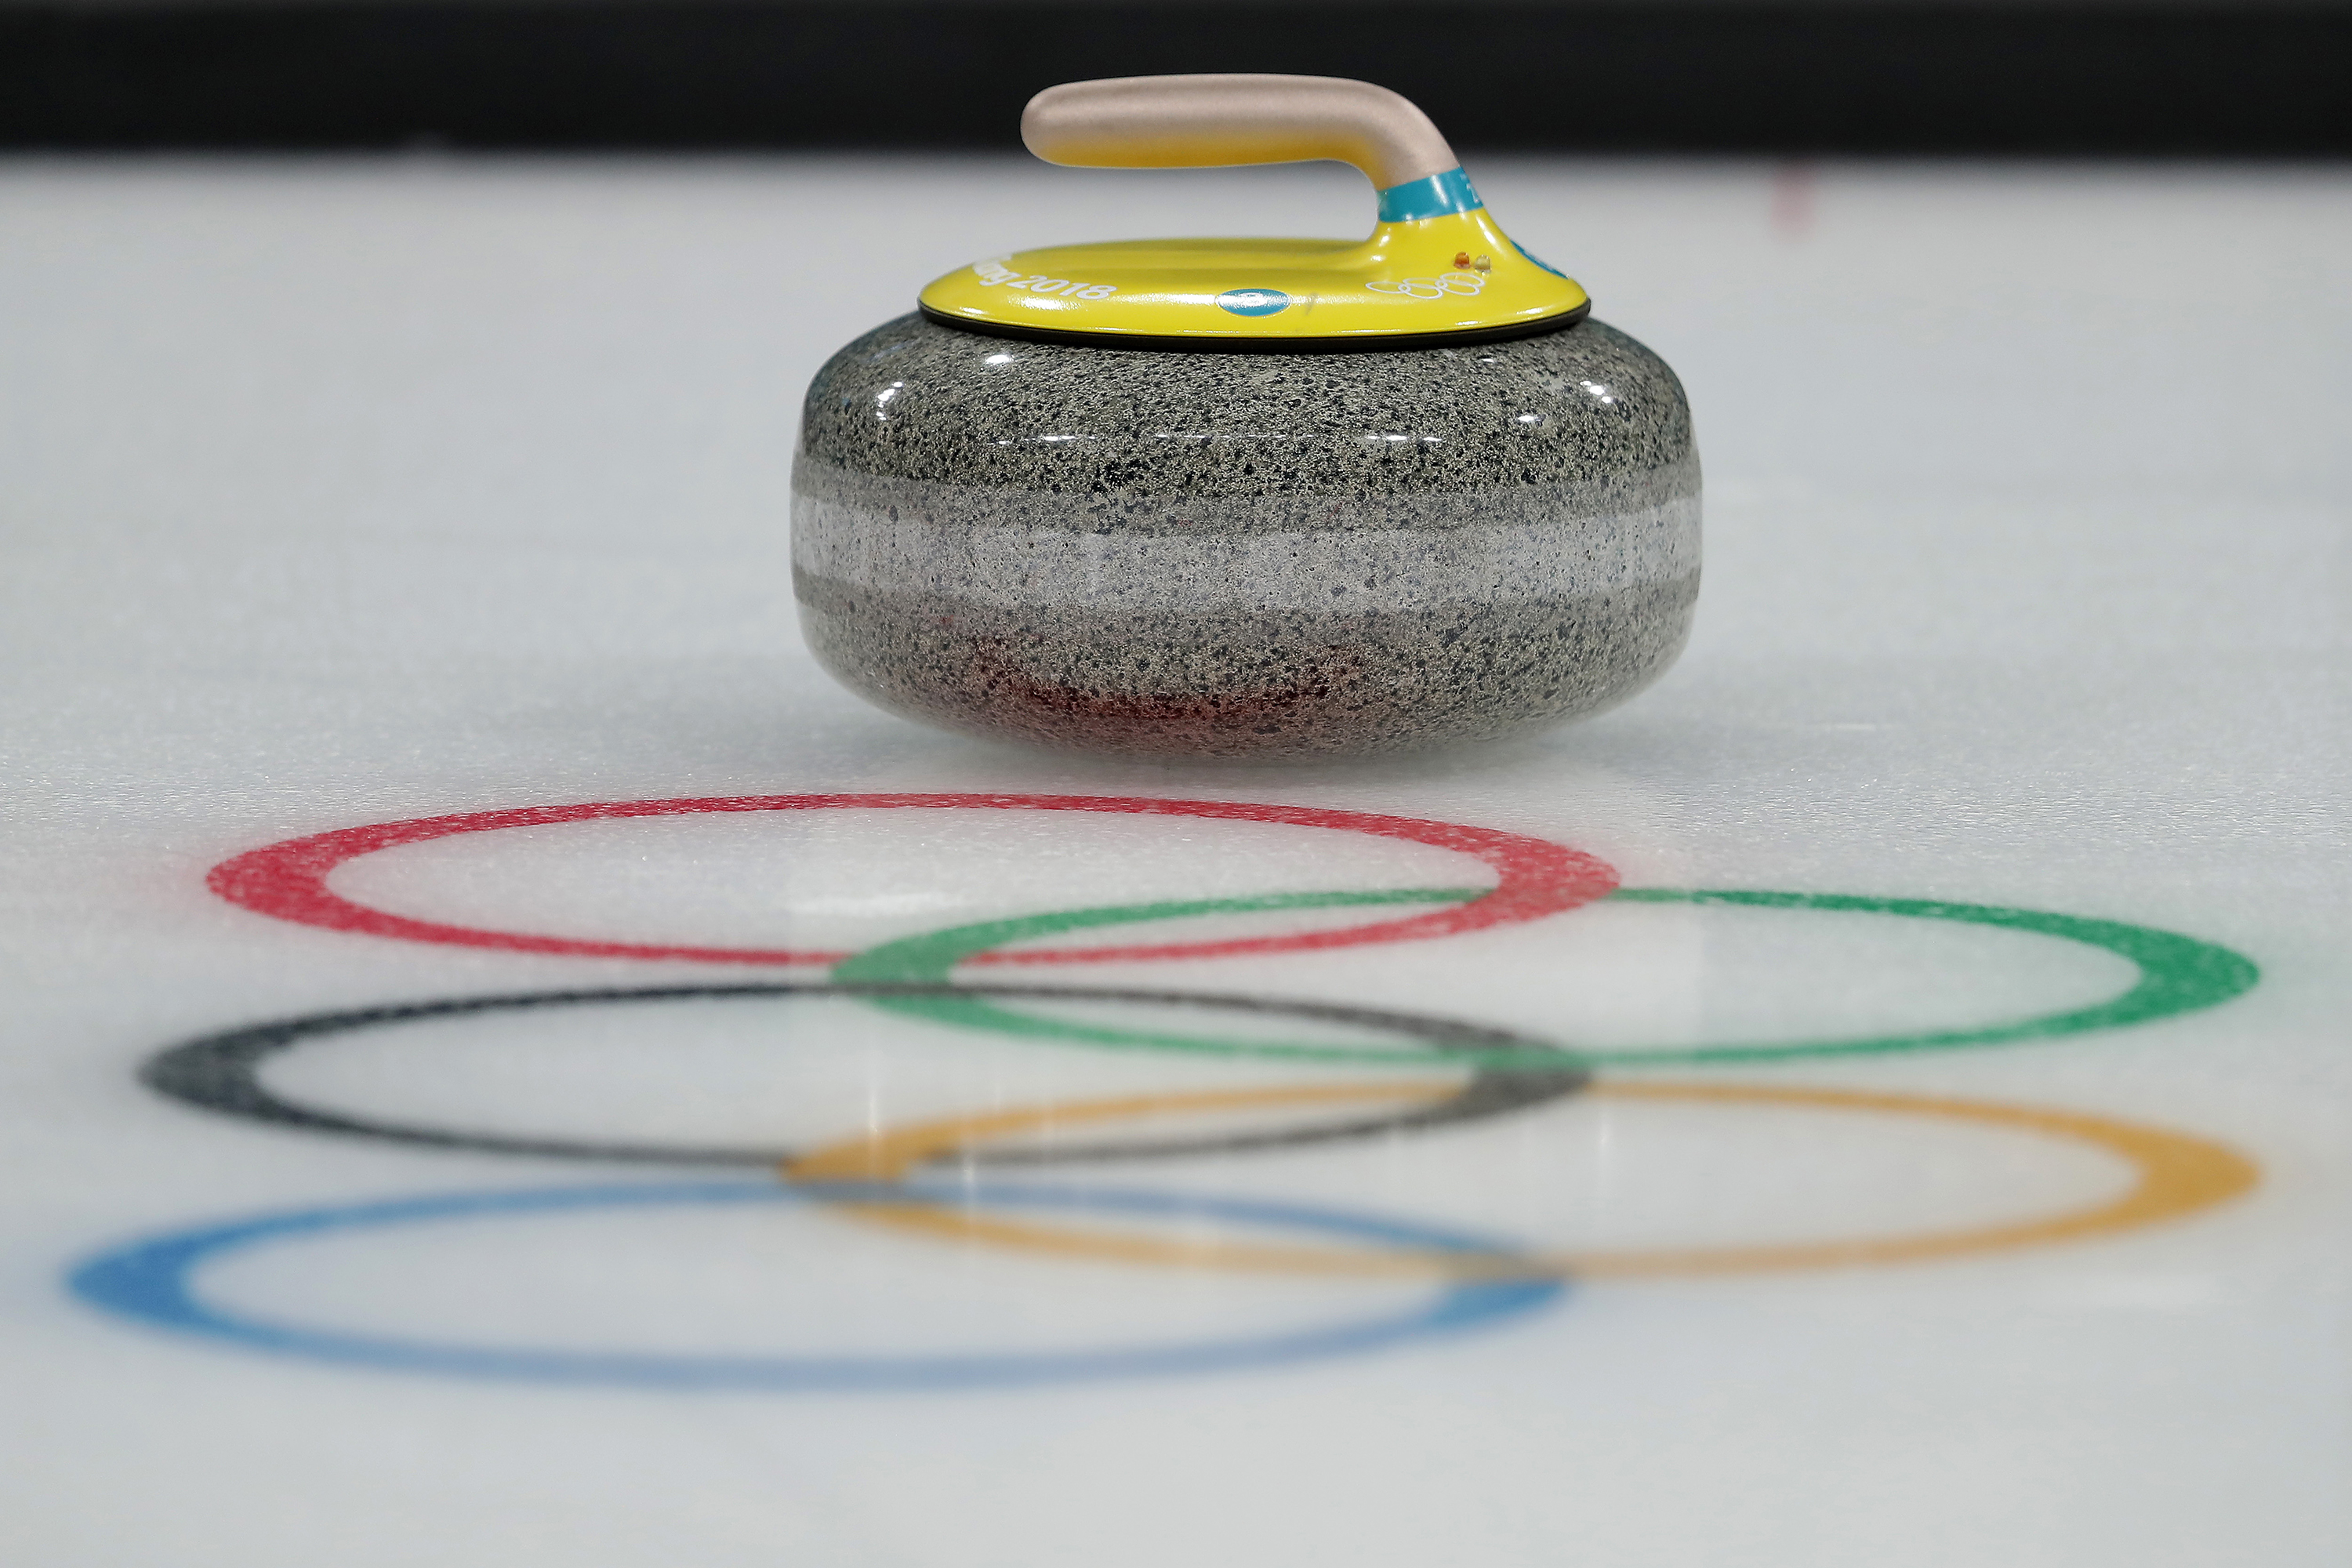 Curling stones are made from a special type of granite.